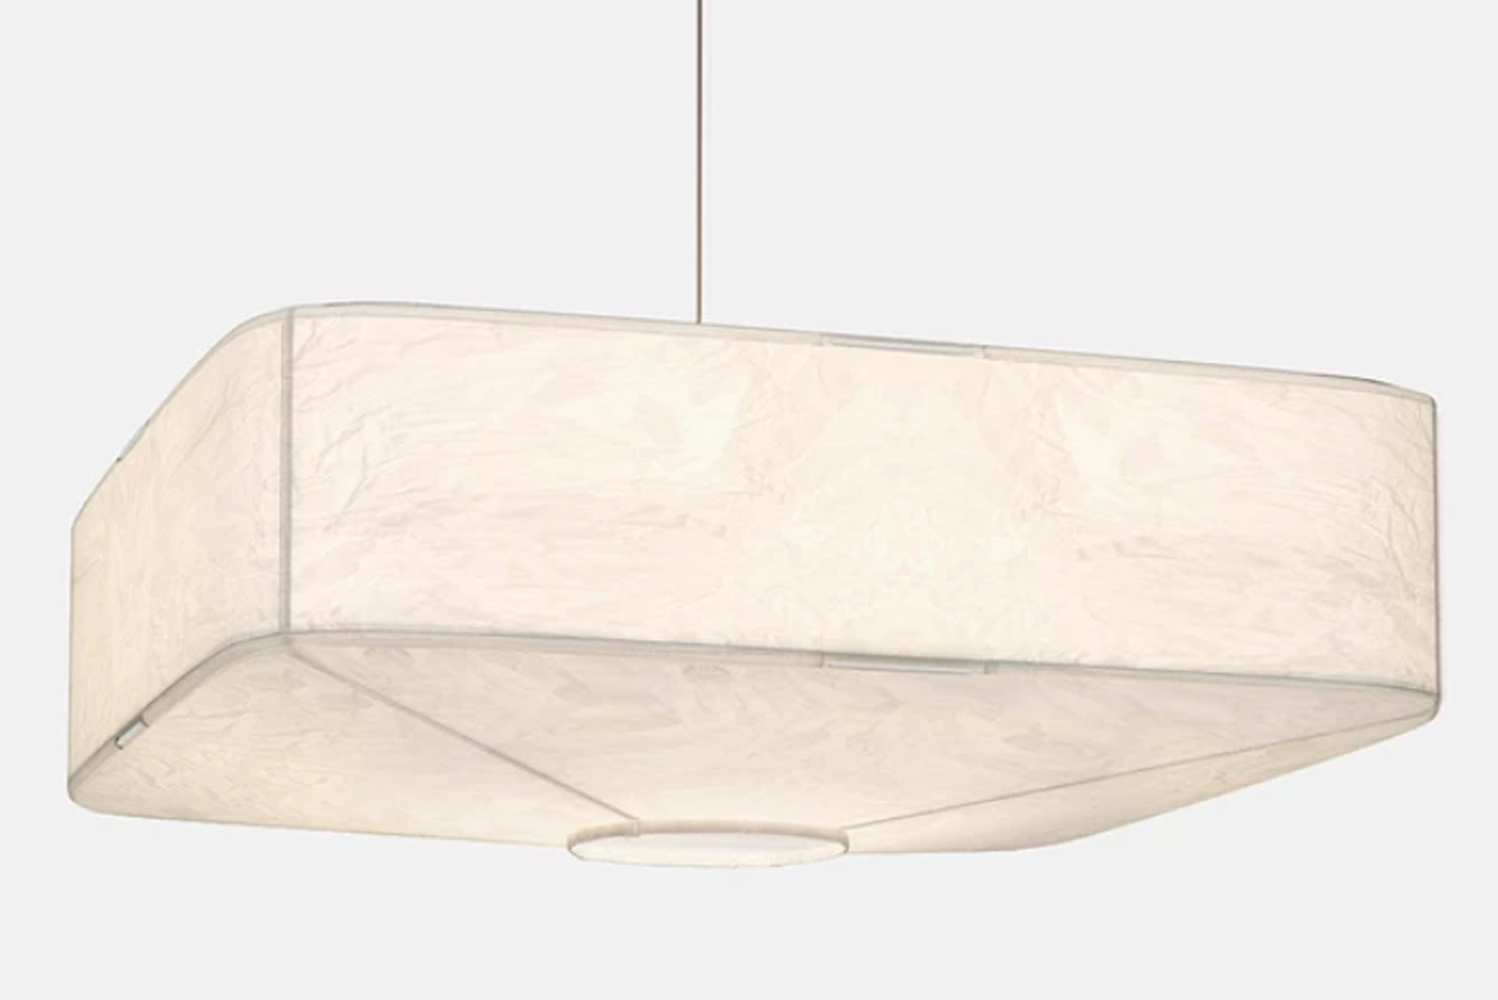 Introducing a new lighting fixture from Rich Brilliant Willing 